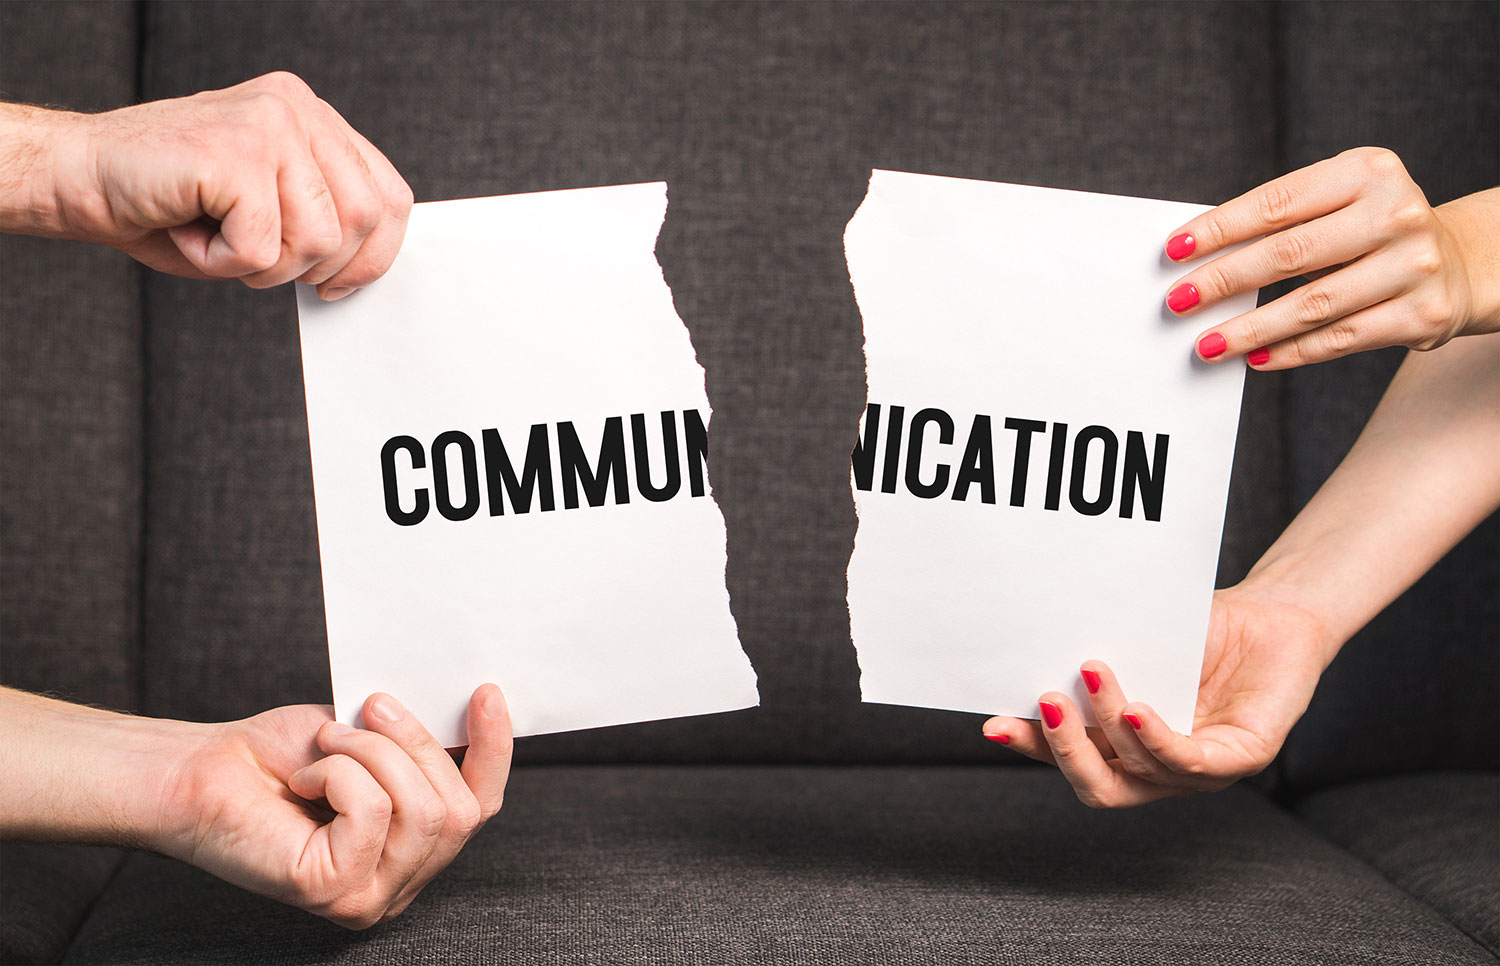 In this striking image, two individuals passionately tear apart a paper bearing the word "communication." Their intense actions symbolize the challenges faced in relationships, particularly in the context of Atlanta marriage counseling, where the mending and rebuilding of communication bridges are often a central focus. The torn paper serves as a poignant metaphor for the process of repairing and strengthening the lines of communication between couples in need of support and guidance.